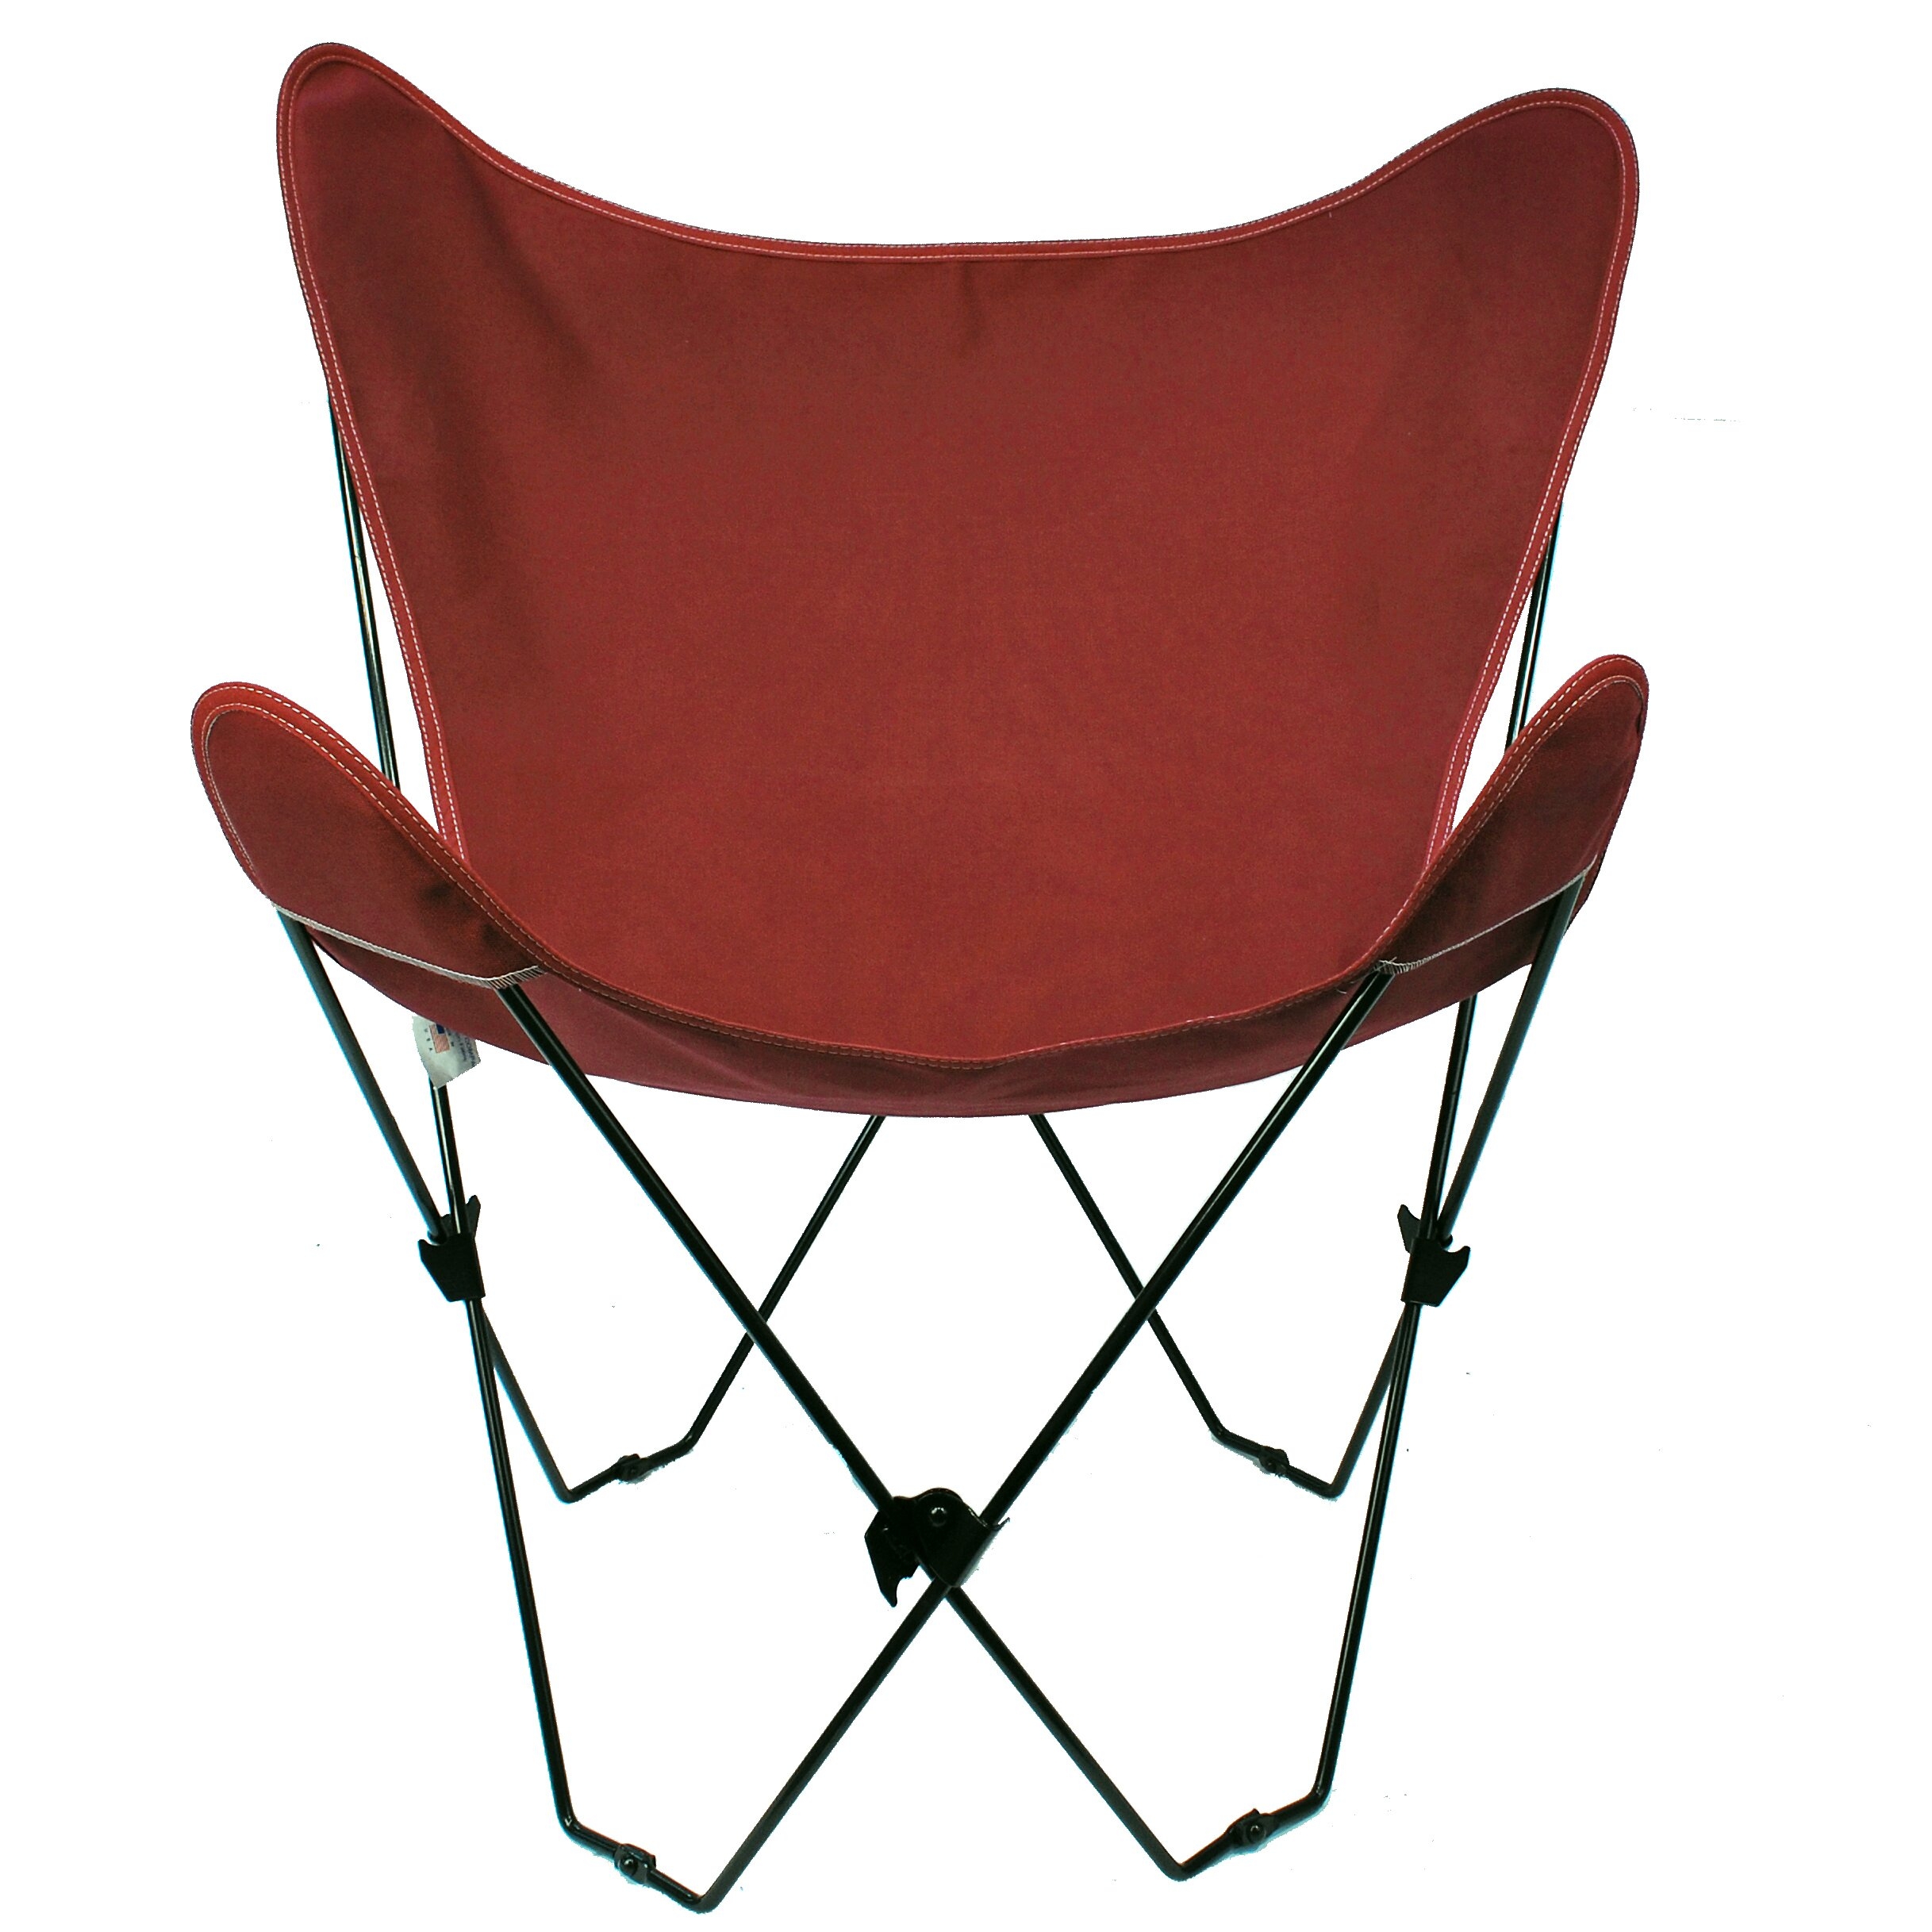 Butterfly chair and cover combination with black frame